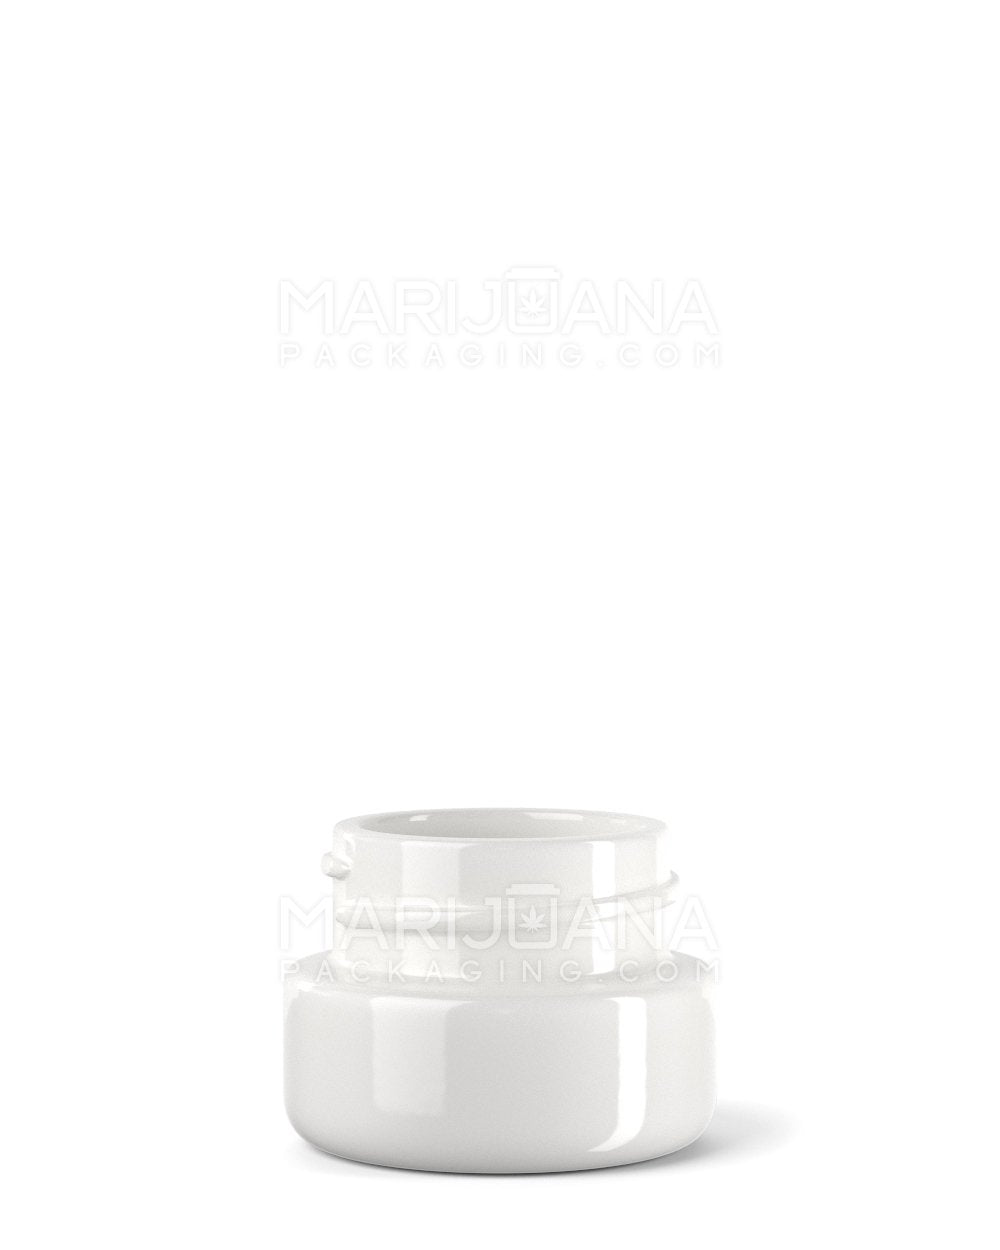 Glossy White Glass Concentrate Containers | 29mm - 5mL | Sample - 1